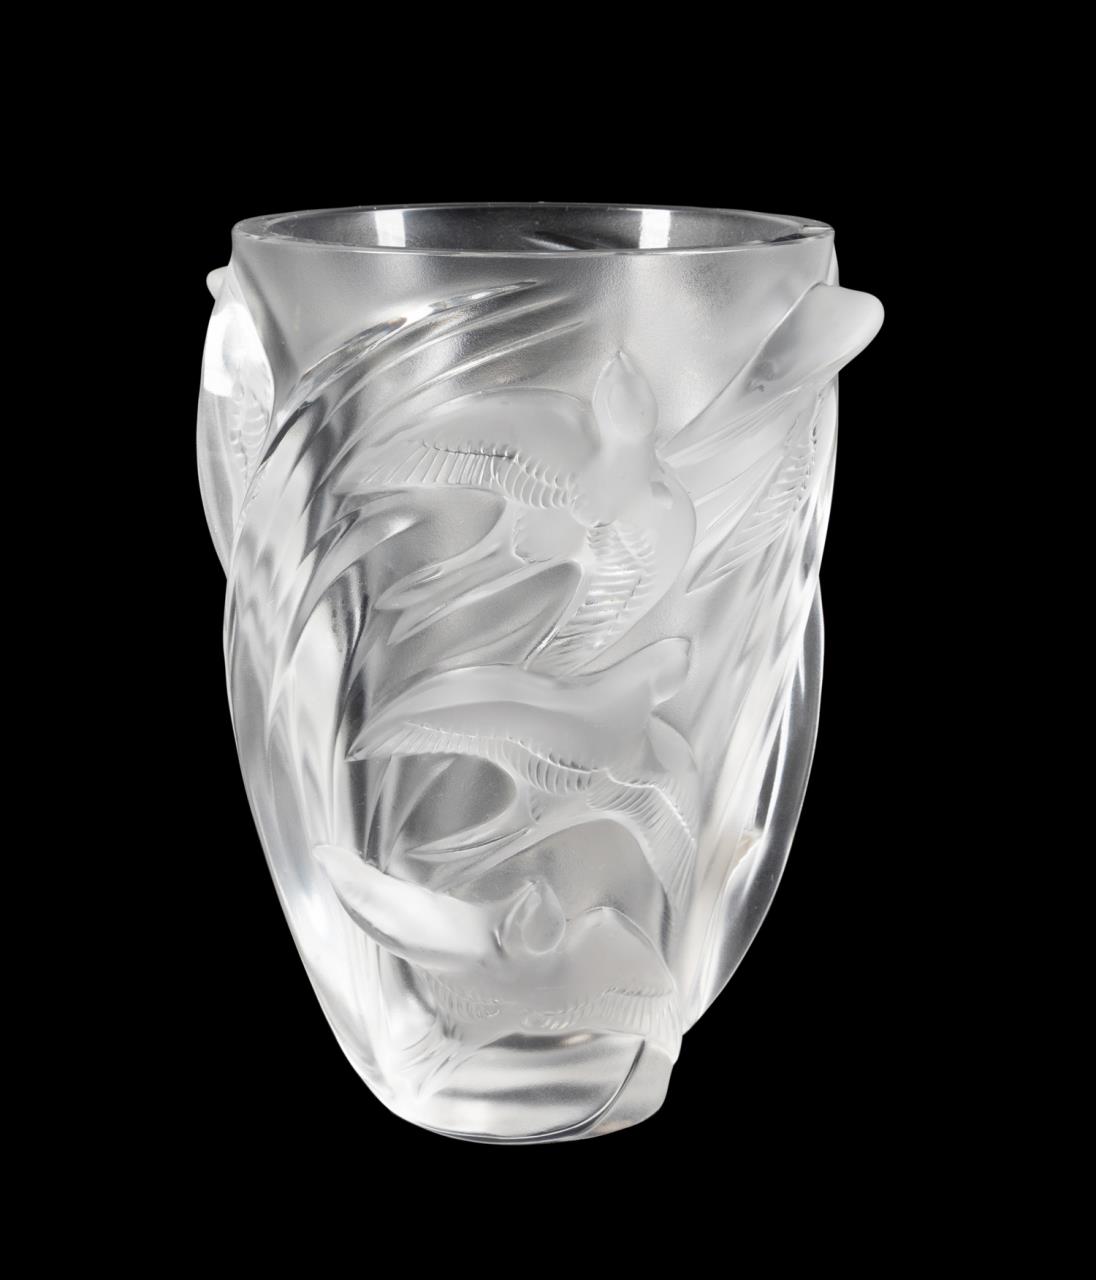 LALIQUE "MARTINETS" COLORLESS FROSTED